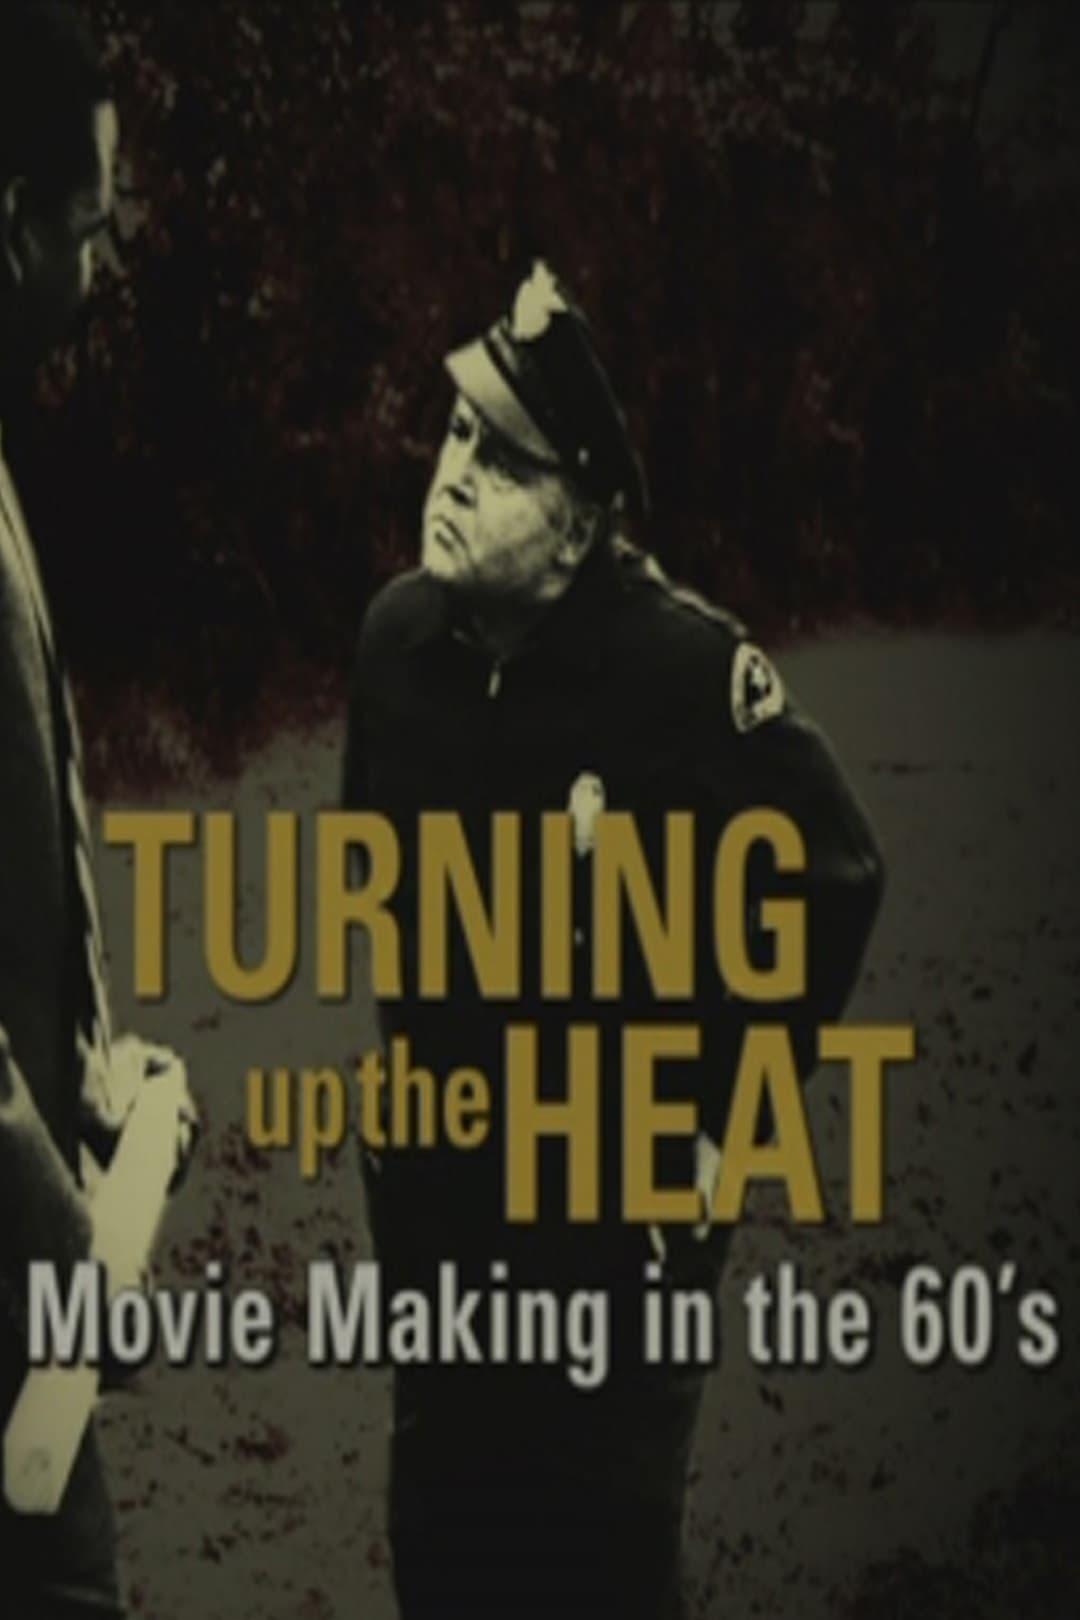 Turning Up the Heat: Movie Making in the 60's poster